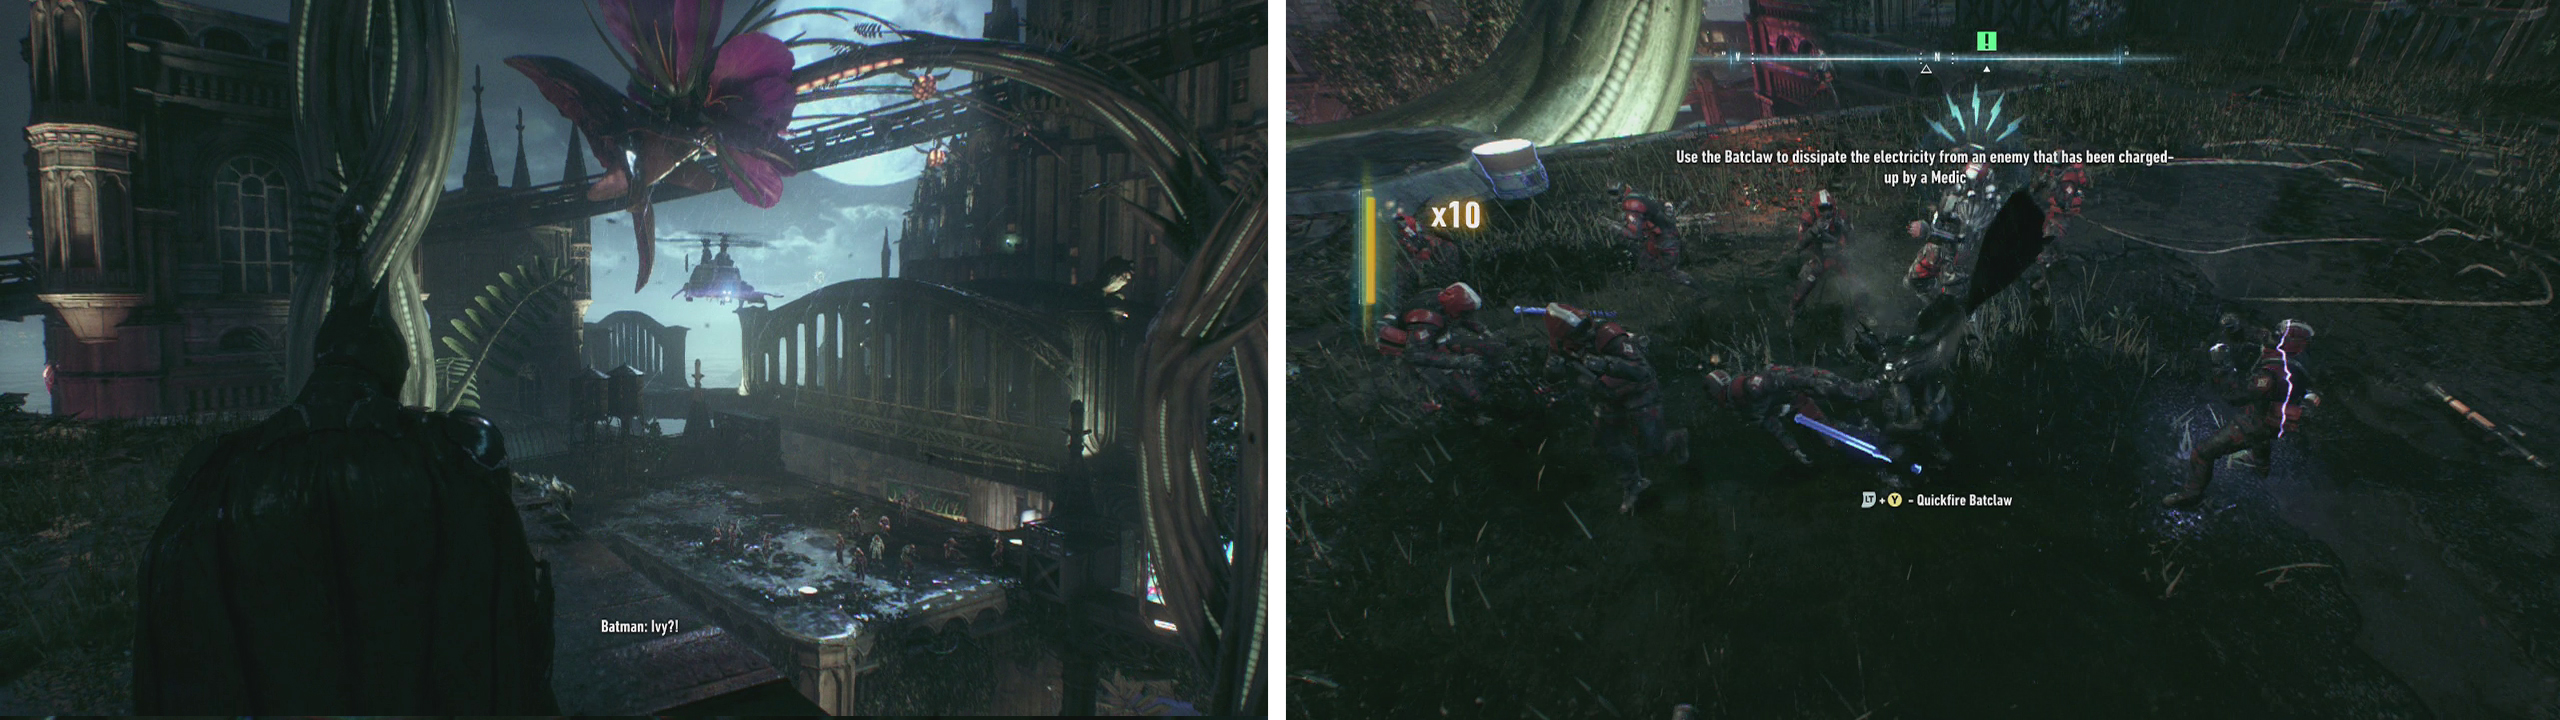 After triggering the plant (left). Fly to the nearby rooftop and take down the enemies in melee combat (right).